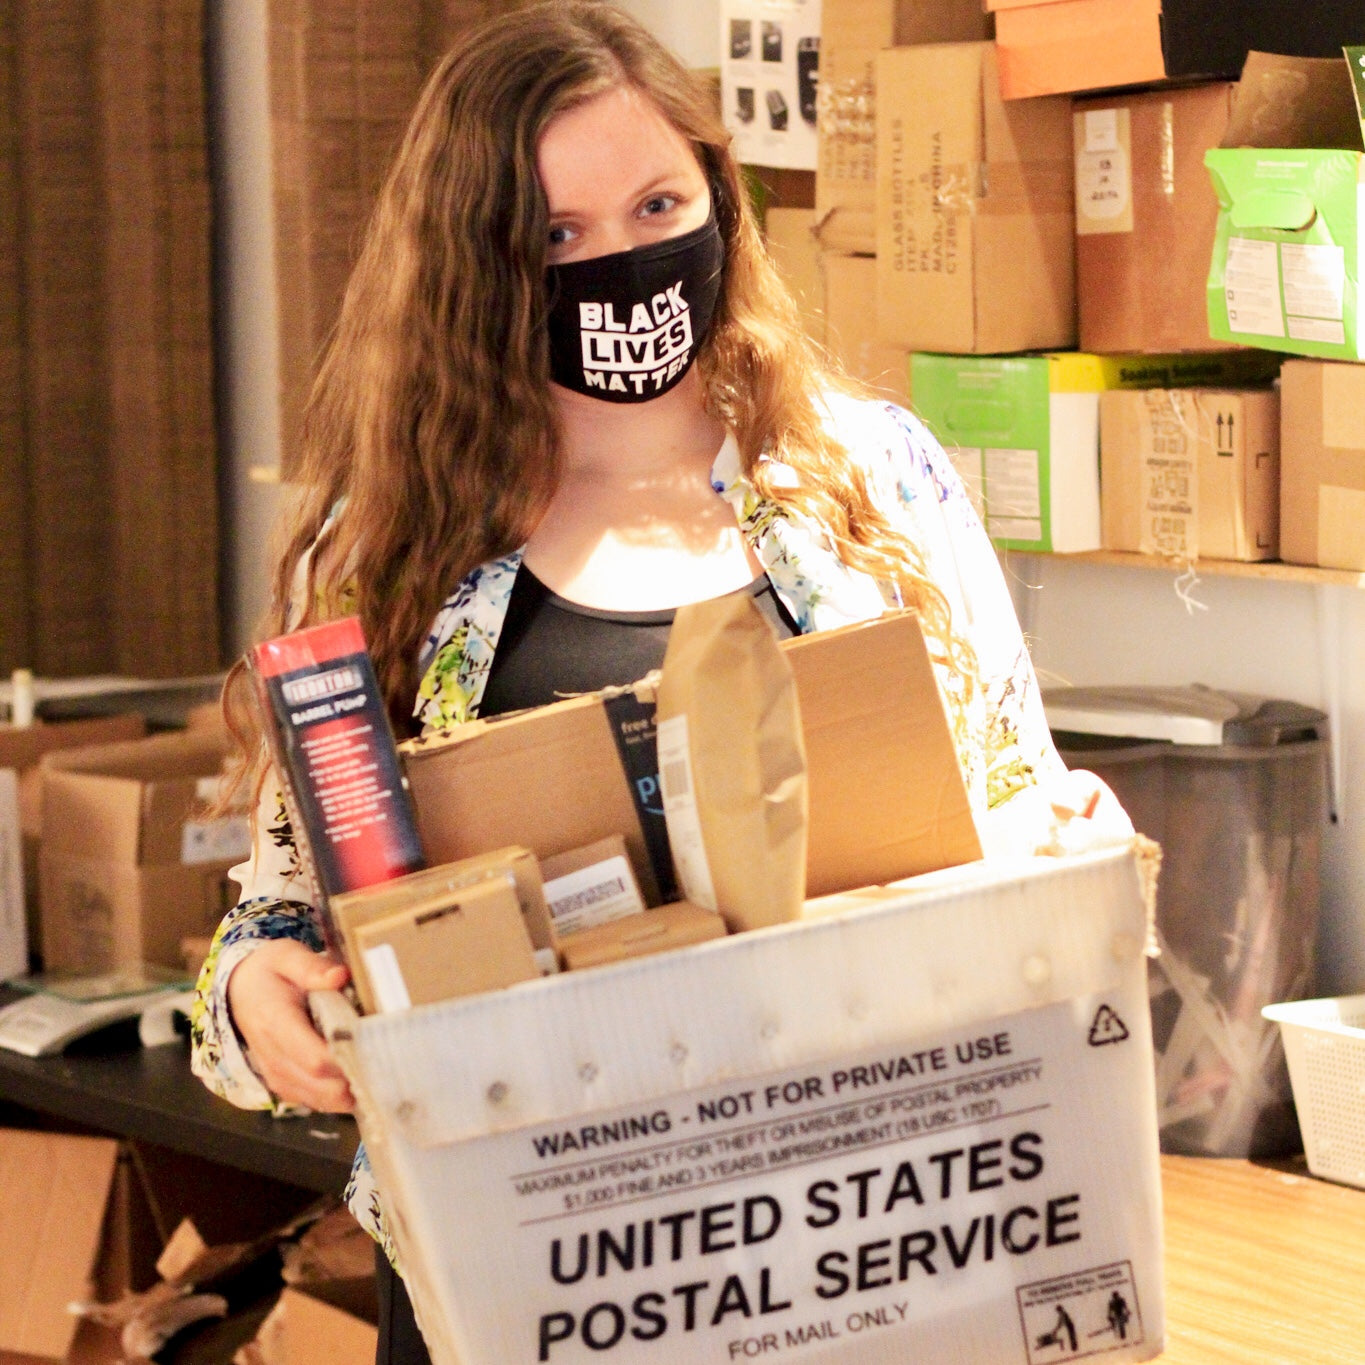 A young woman holding an United States postal office tub of packages while wearing a black lives matter mask.